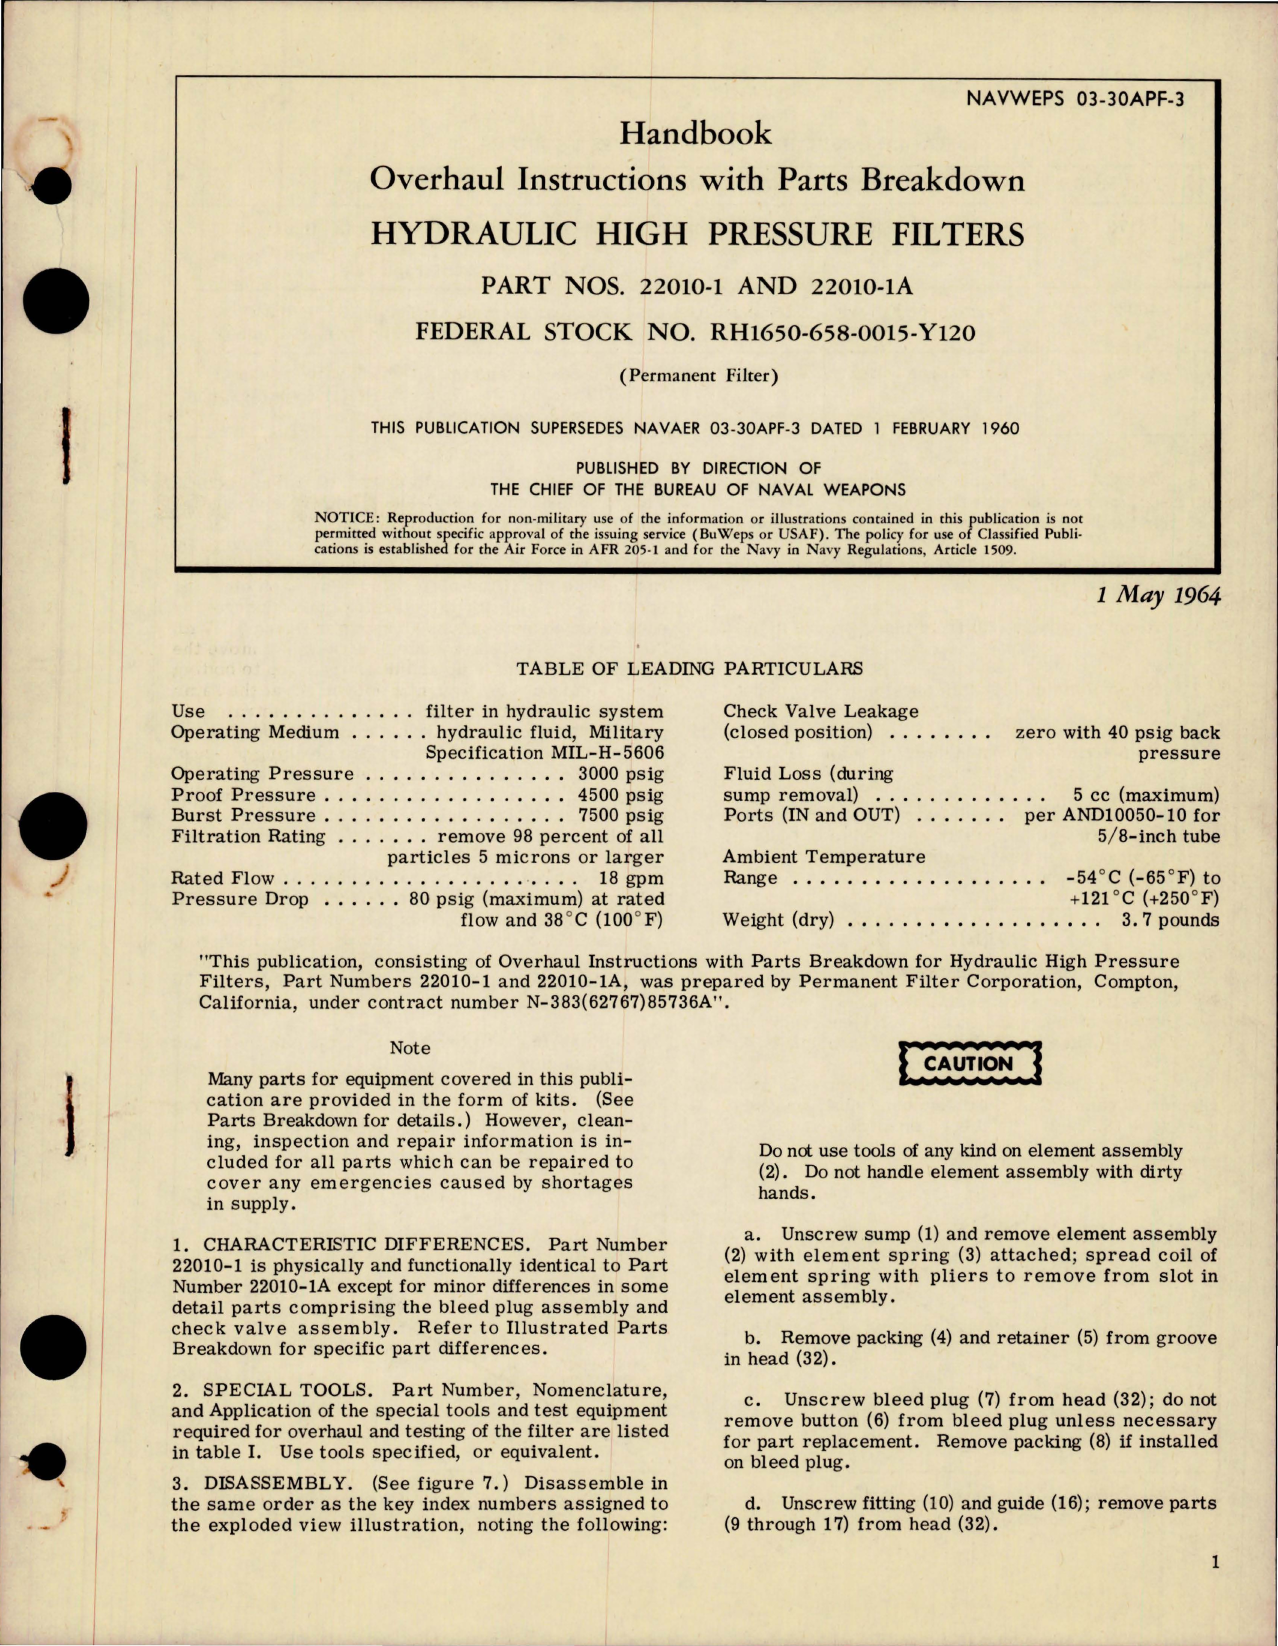 Sample page 1 from AirCorps Library document: Overhaul Instructions with Parts for Hydraulic High Pressure Filters - Parts 22010-1 and 22010-1A 